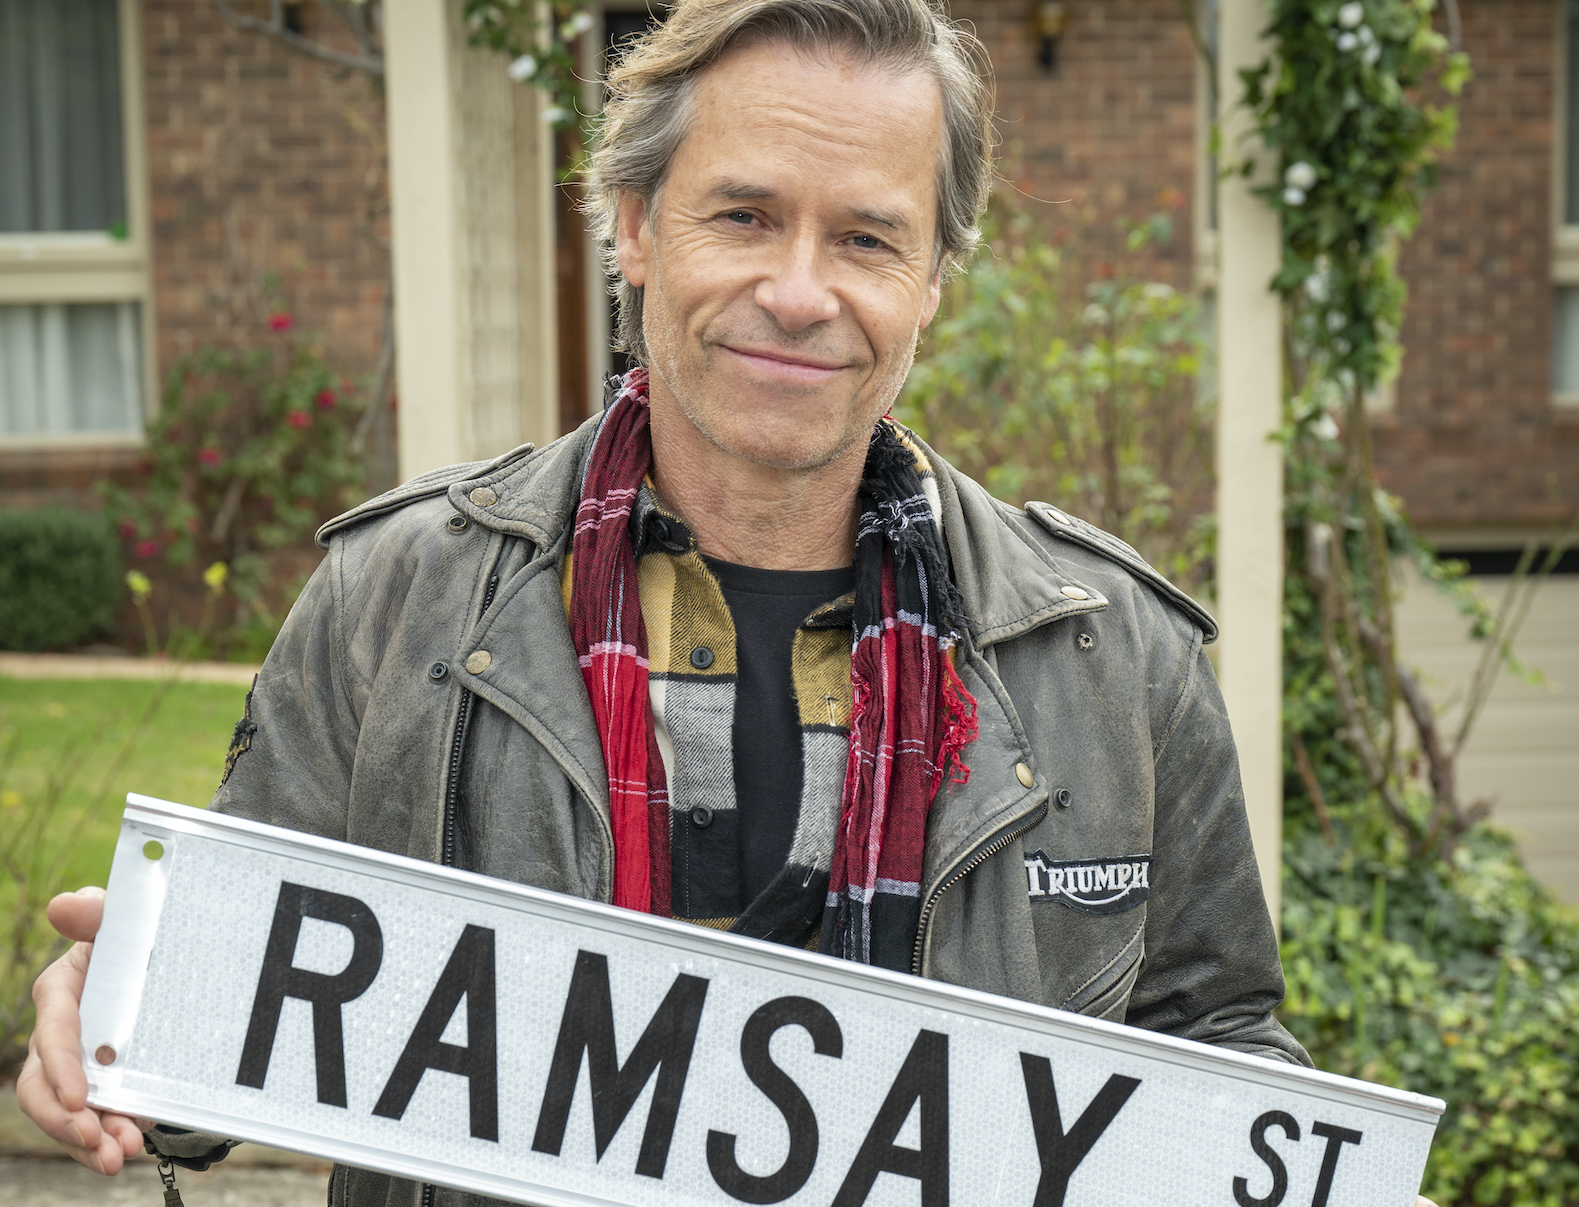 Guy Pearce holding Ramsay Street sign